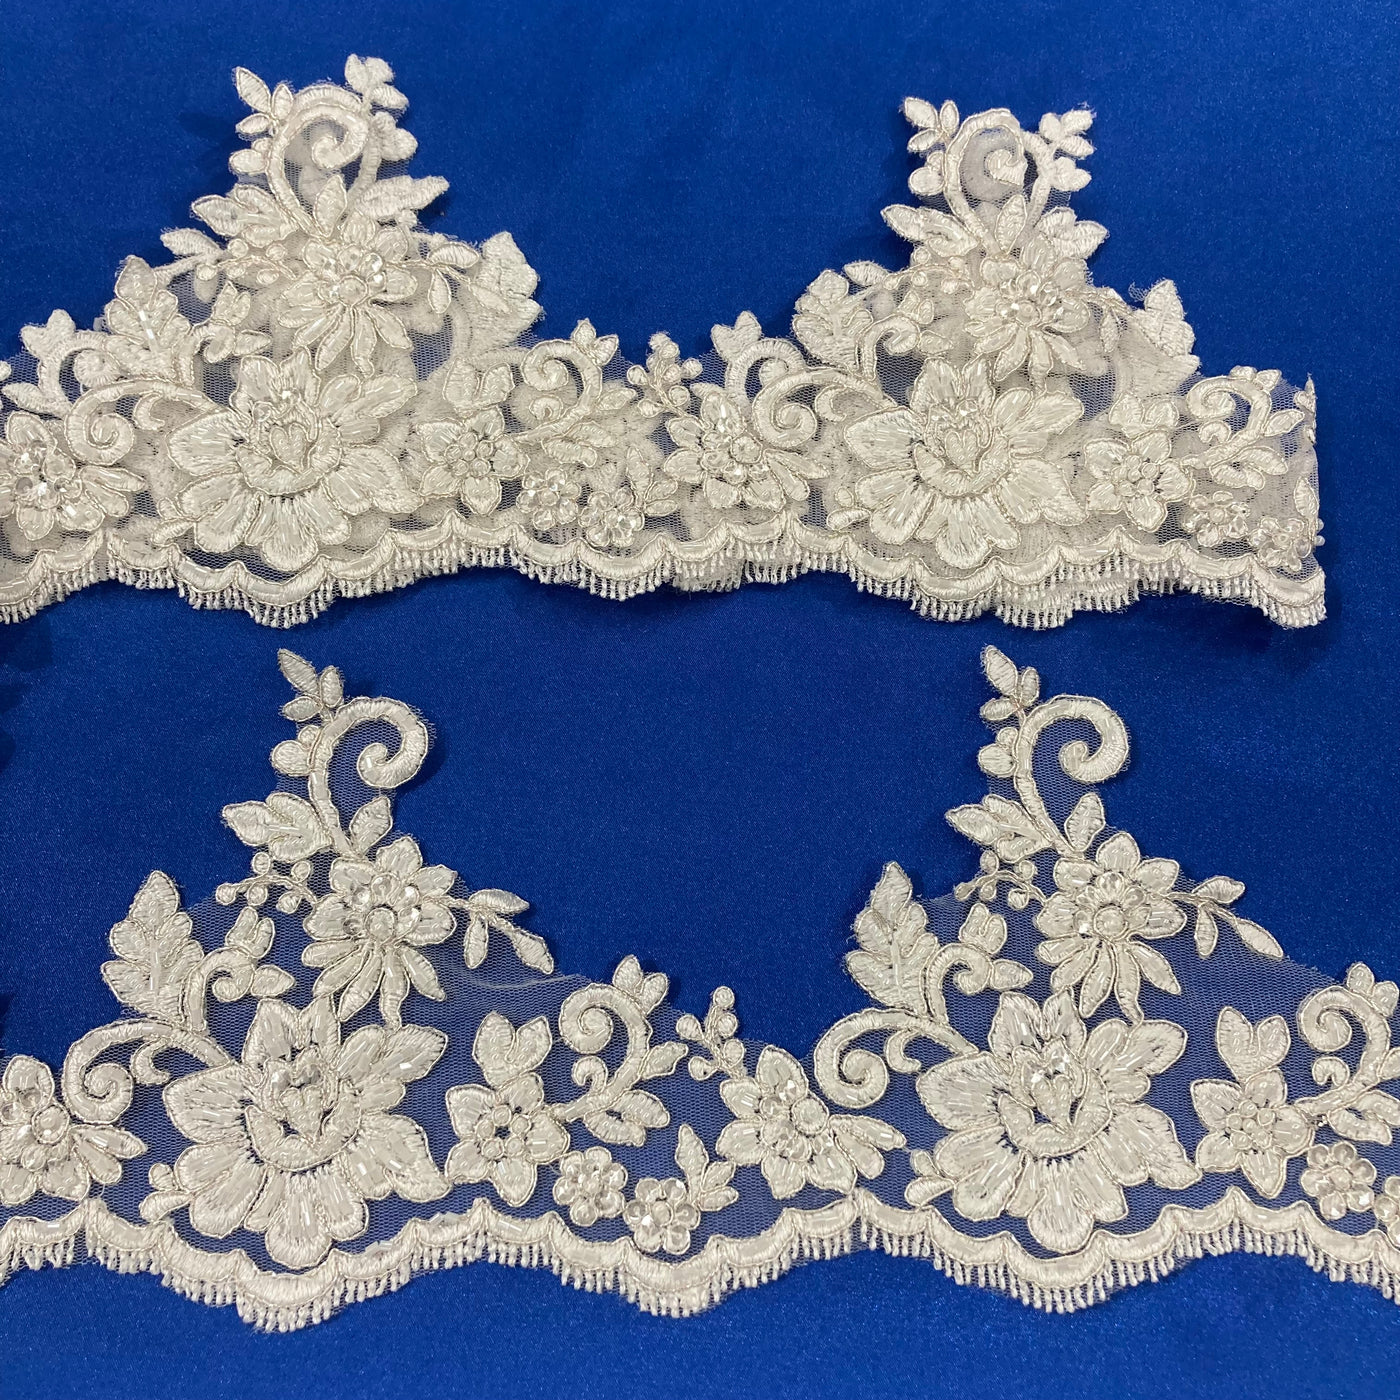 Corded & Beaded Floral Lace Trimming Embroidered on 100% Polyester Net Mesh. Lace Usa